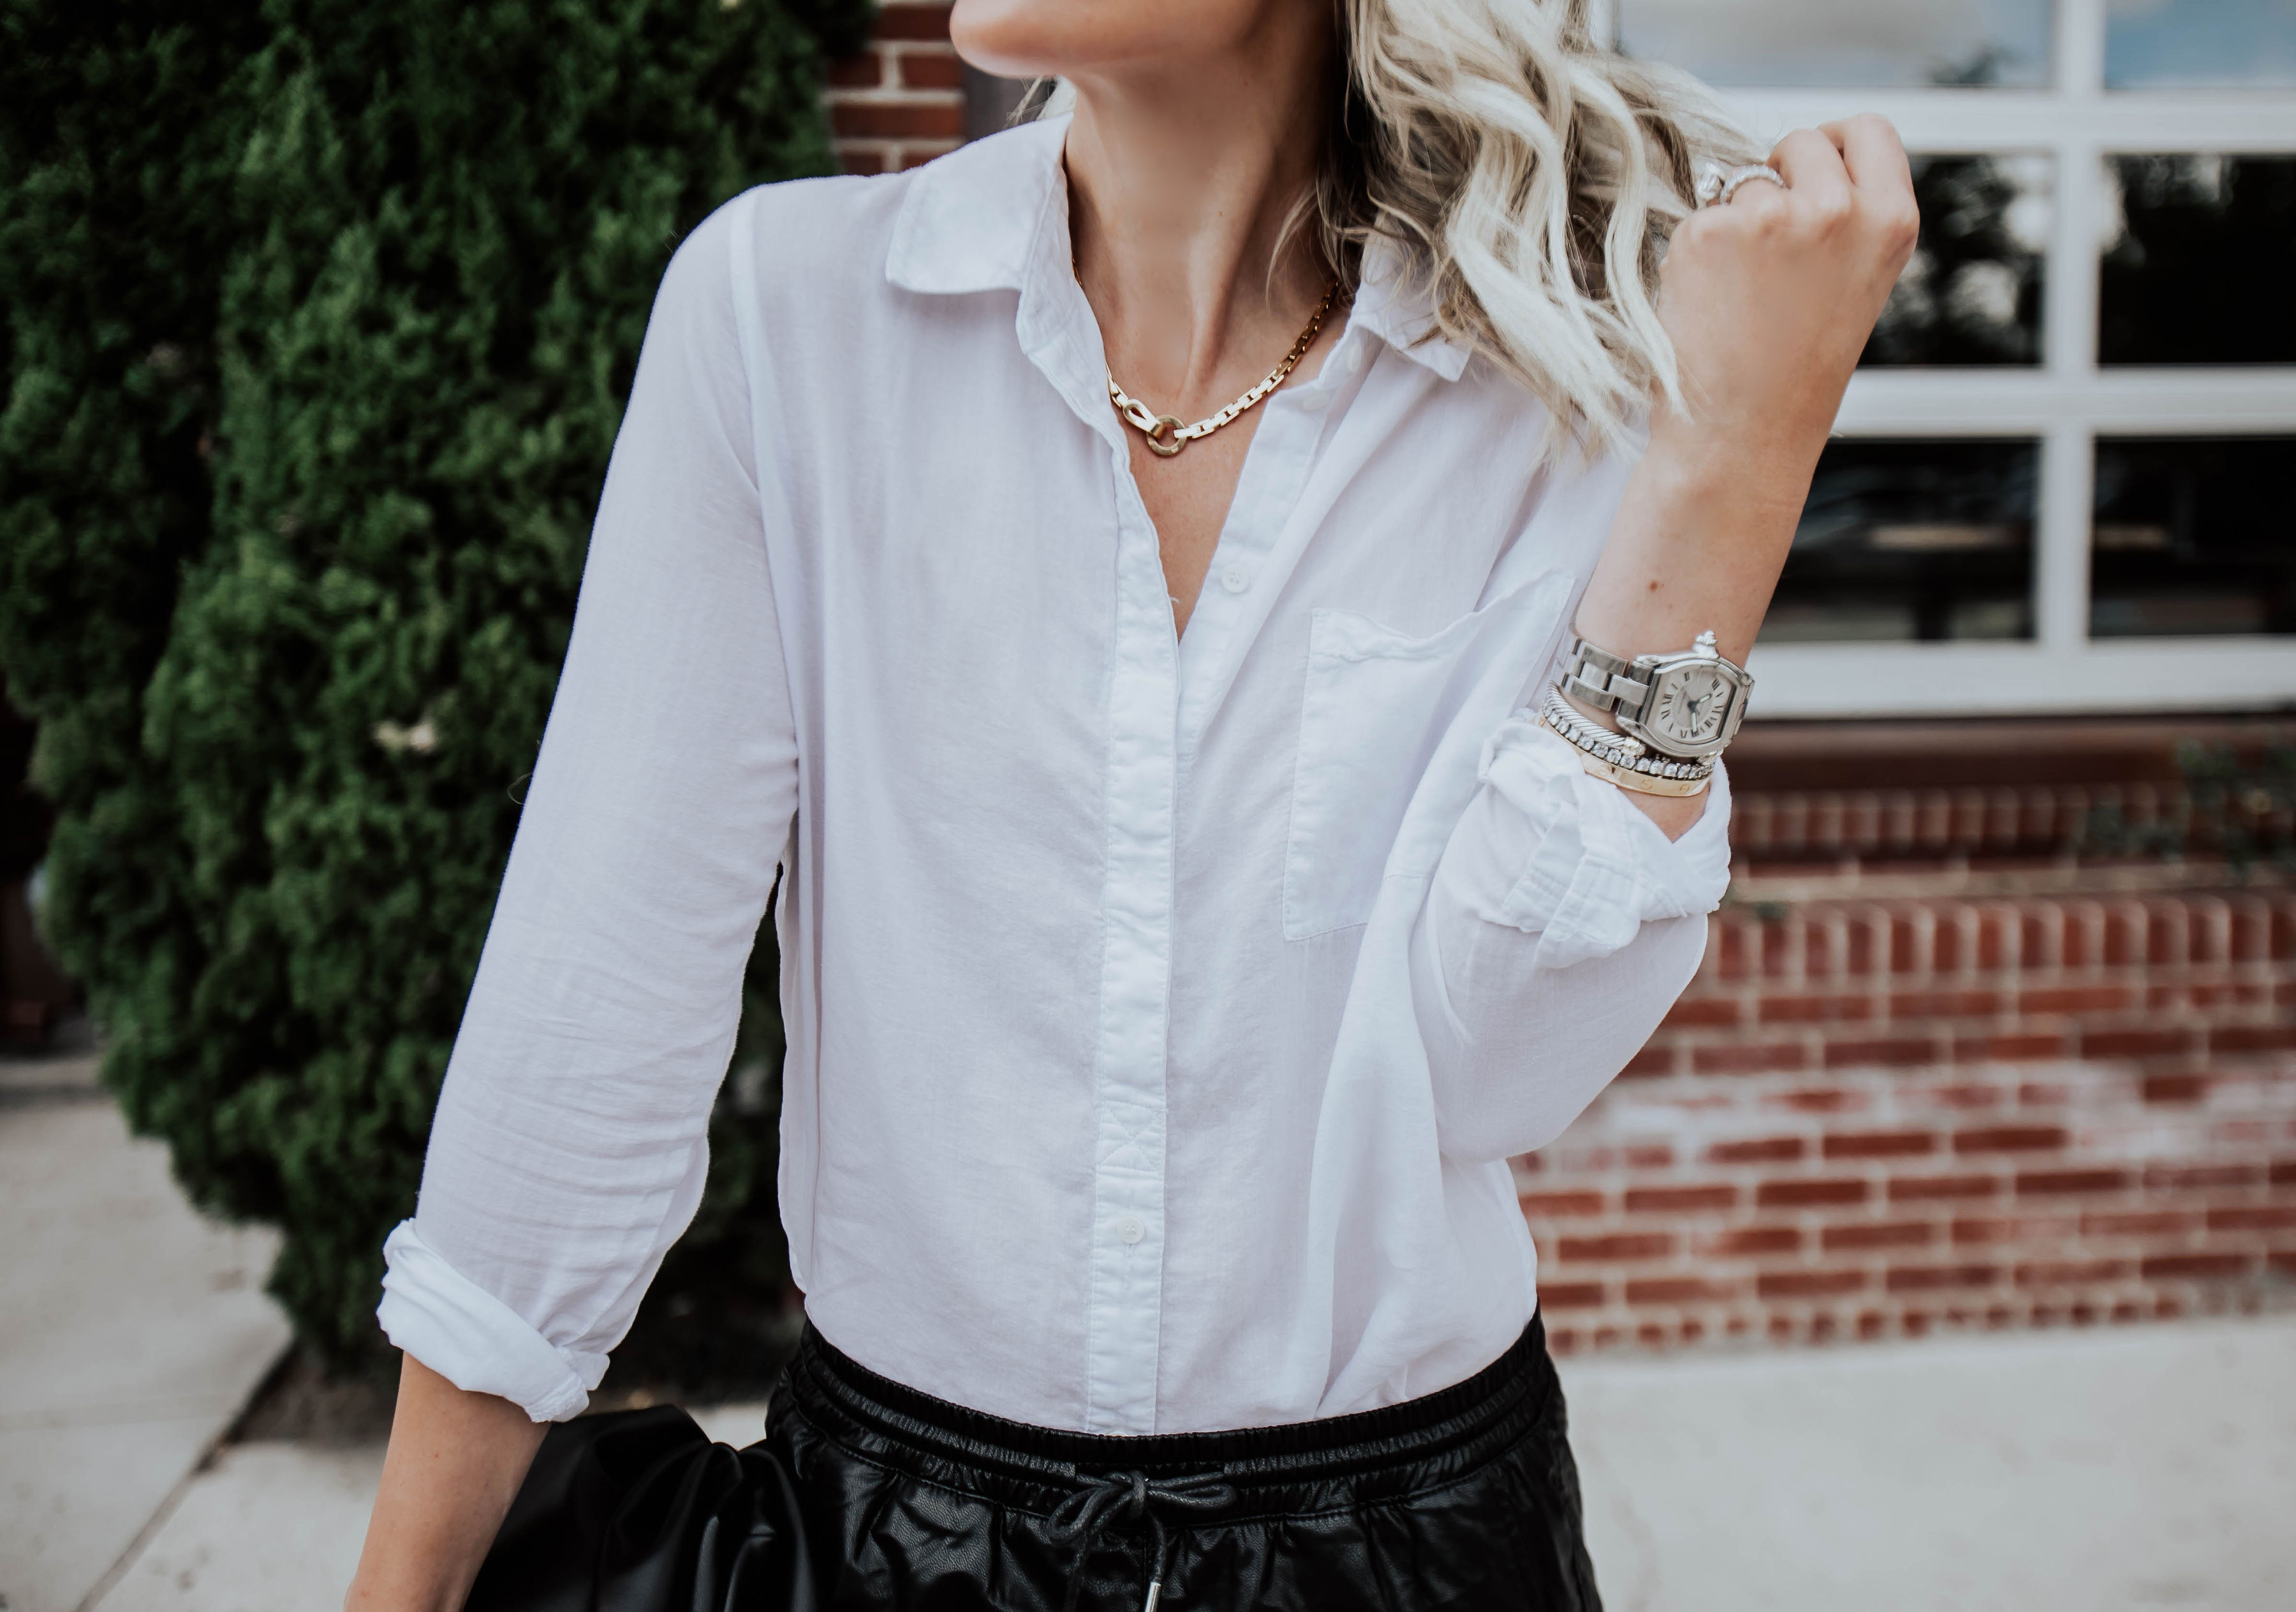 Reno, Nevada blogger, Emily Farren Wieczorek answers one of her most asked questions in todays post... "What is The Best White Button Down" 